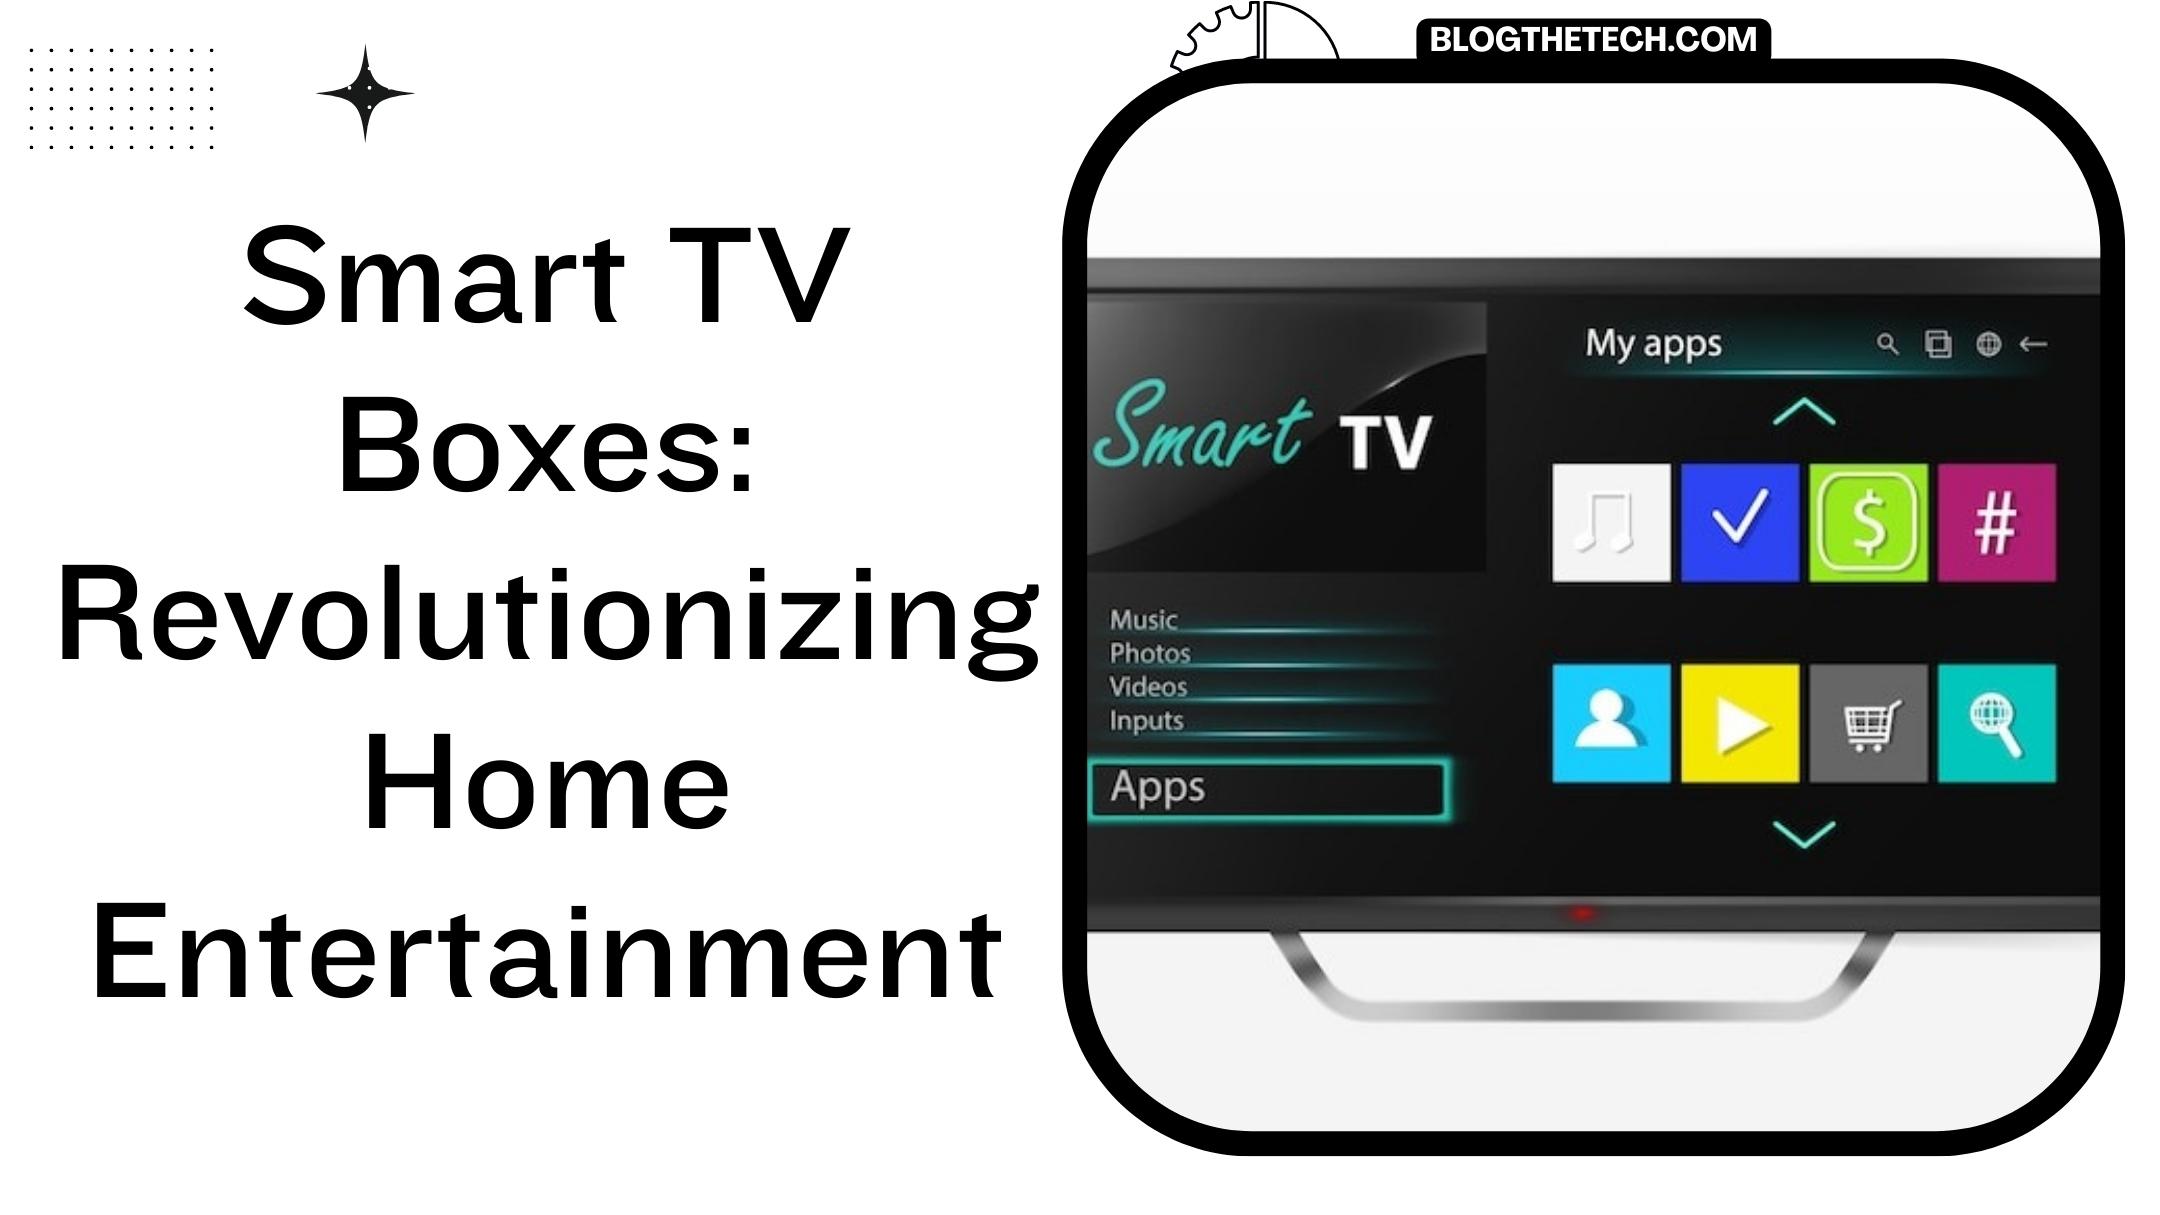 smart-tv-boxes-revolutionizing-home-entertainment-featured